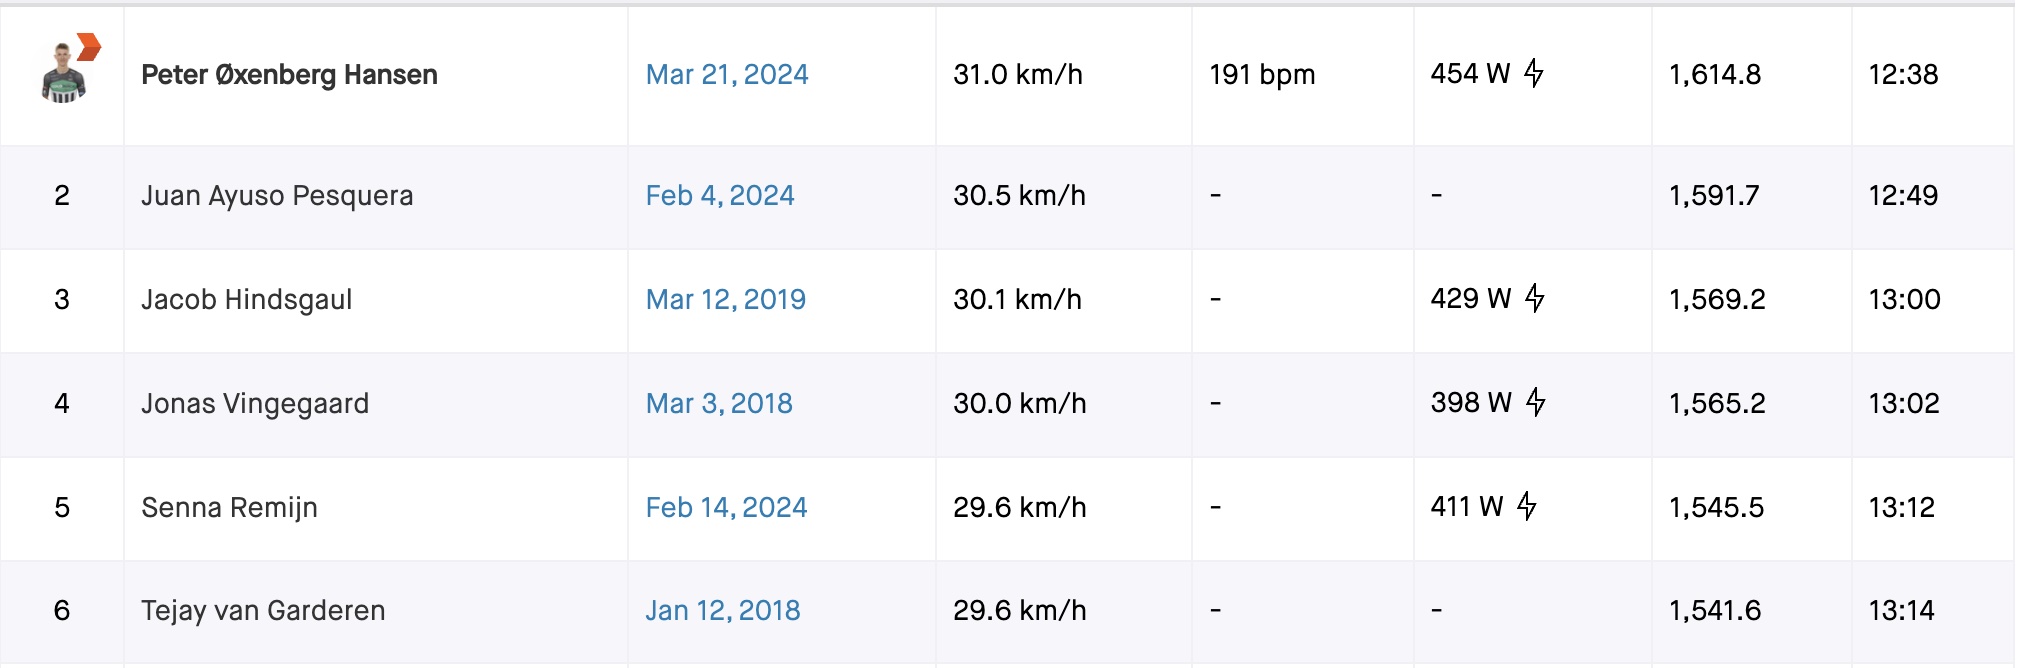 A screengrab of the Strava leaderboard for the Coll de Rates, showing Peter Oxenberg Hansen at the top with a new best time of 12:38, 11 seconds faster than Juan Ayuso's 12:49 set just weeks ago.